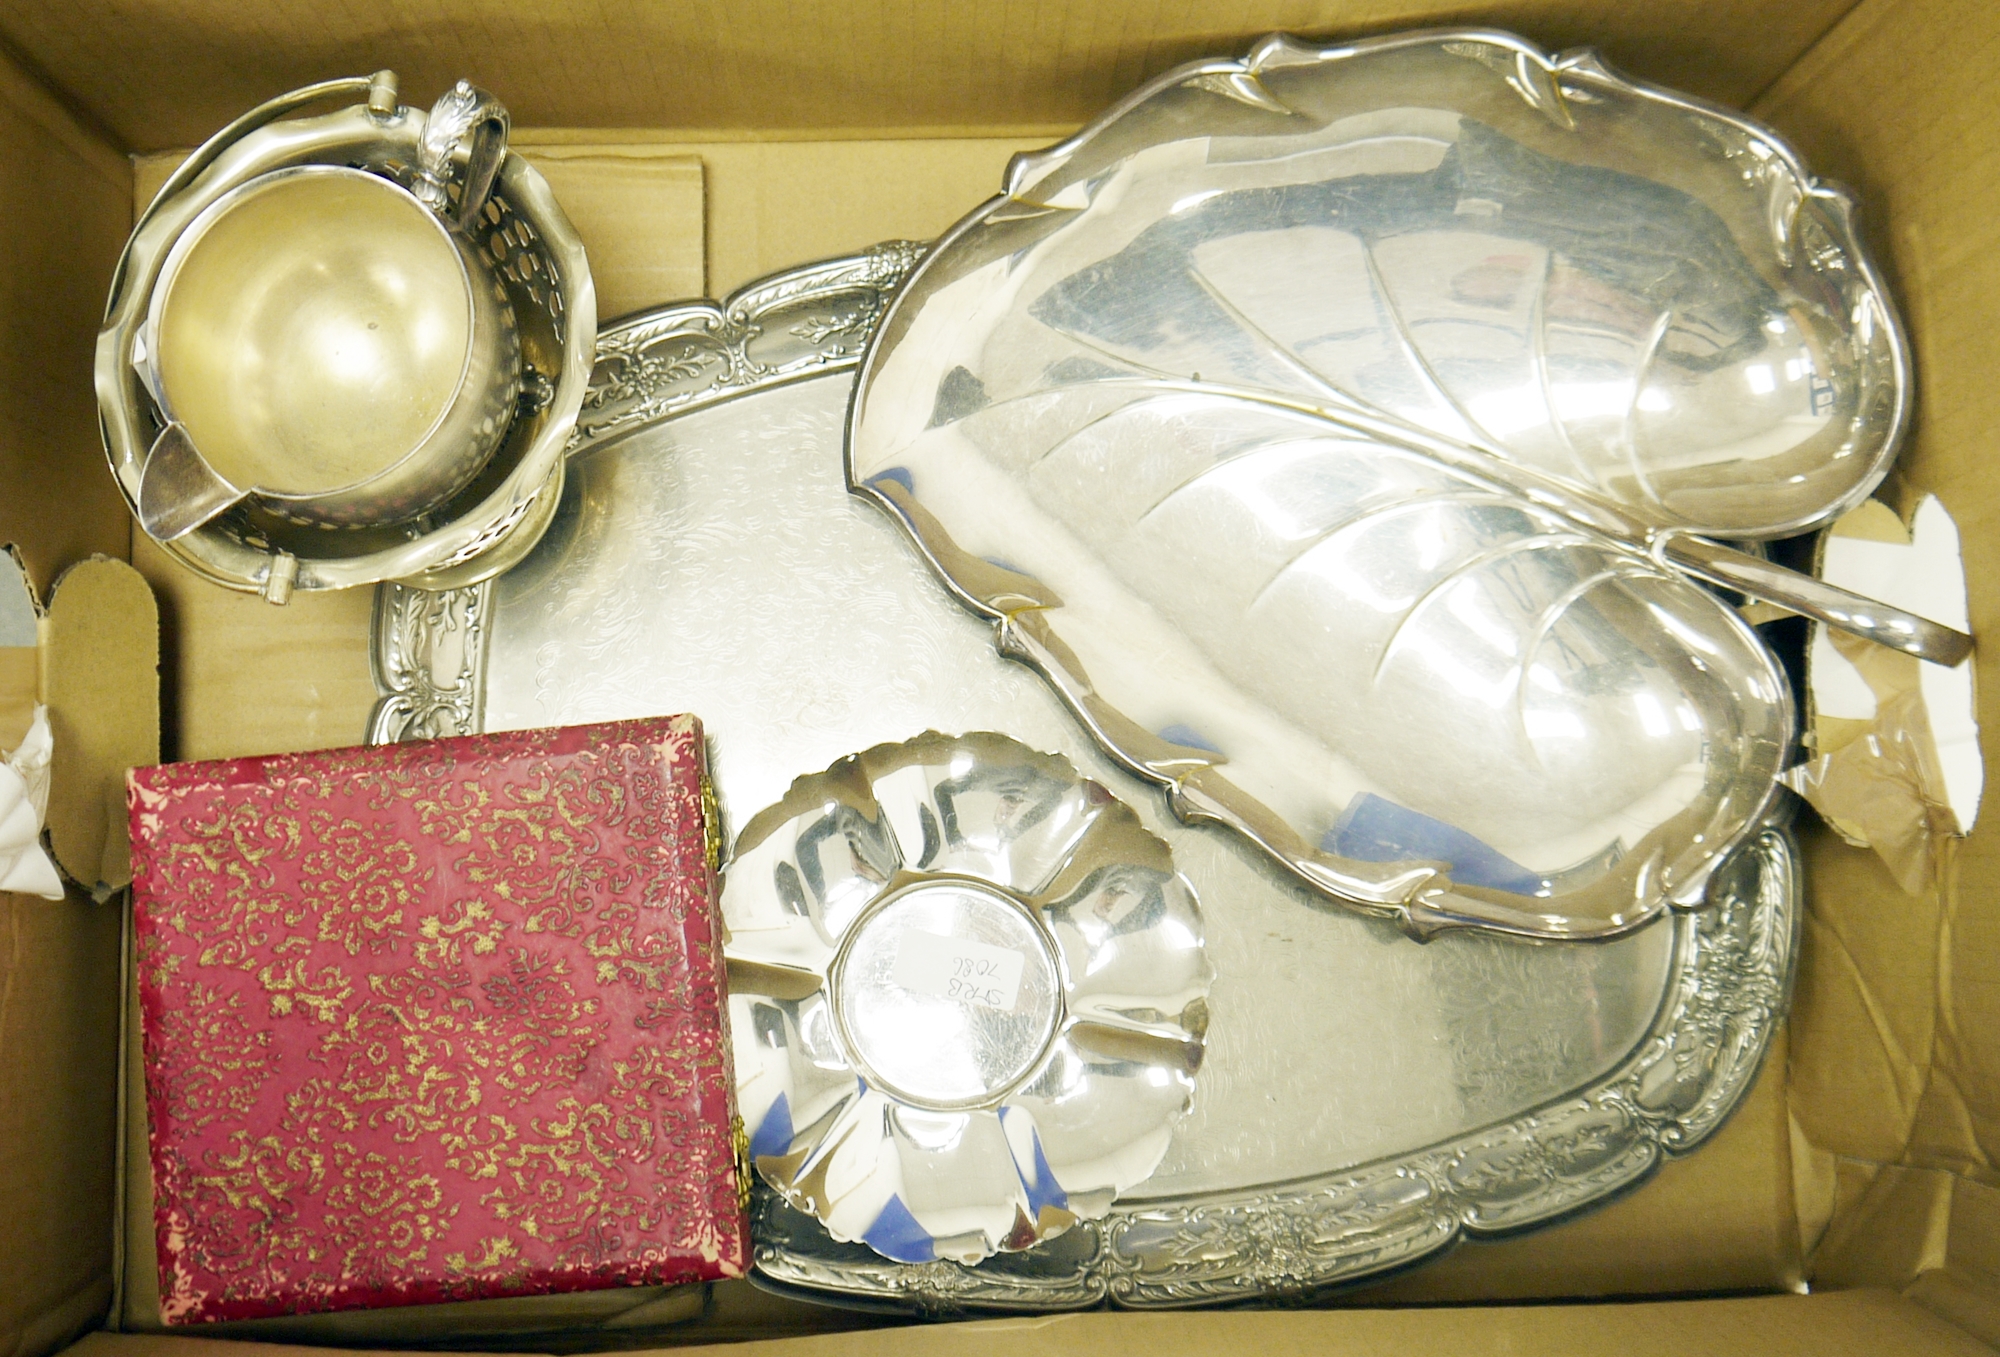 Collection of plated ware, including tea set, various souvenir spoons, vases, dishes, tray, bowls, - Image 3 of 3